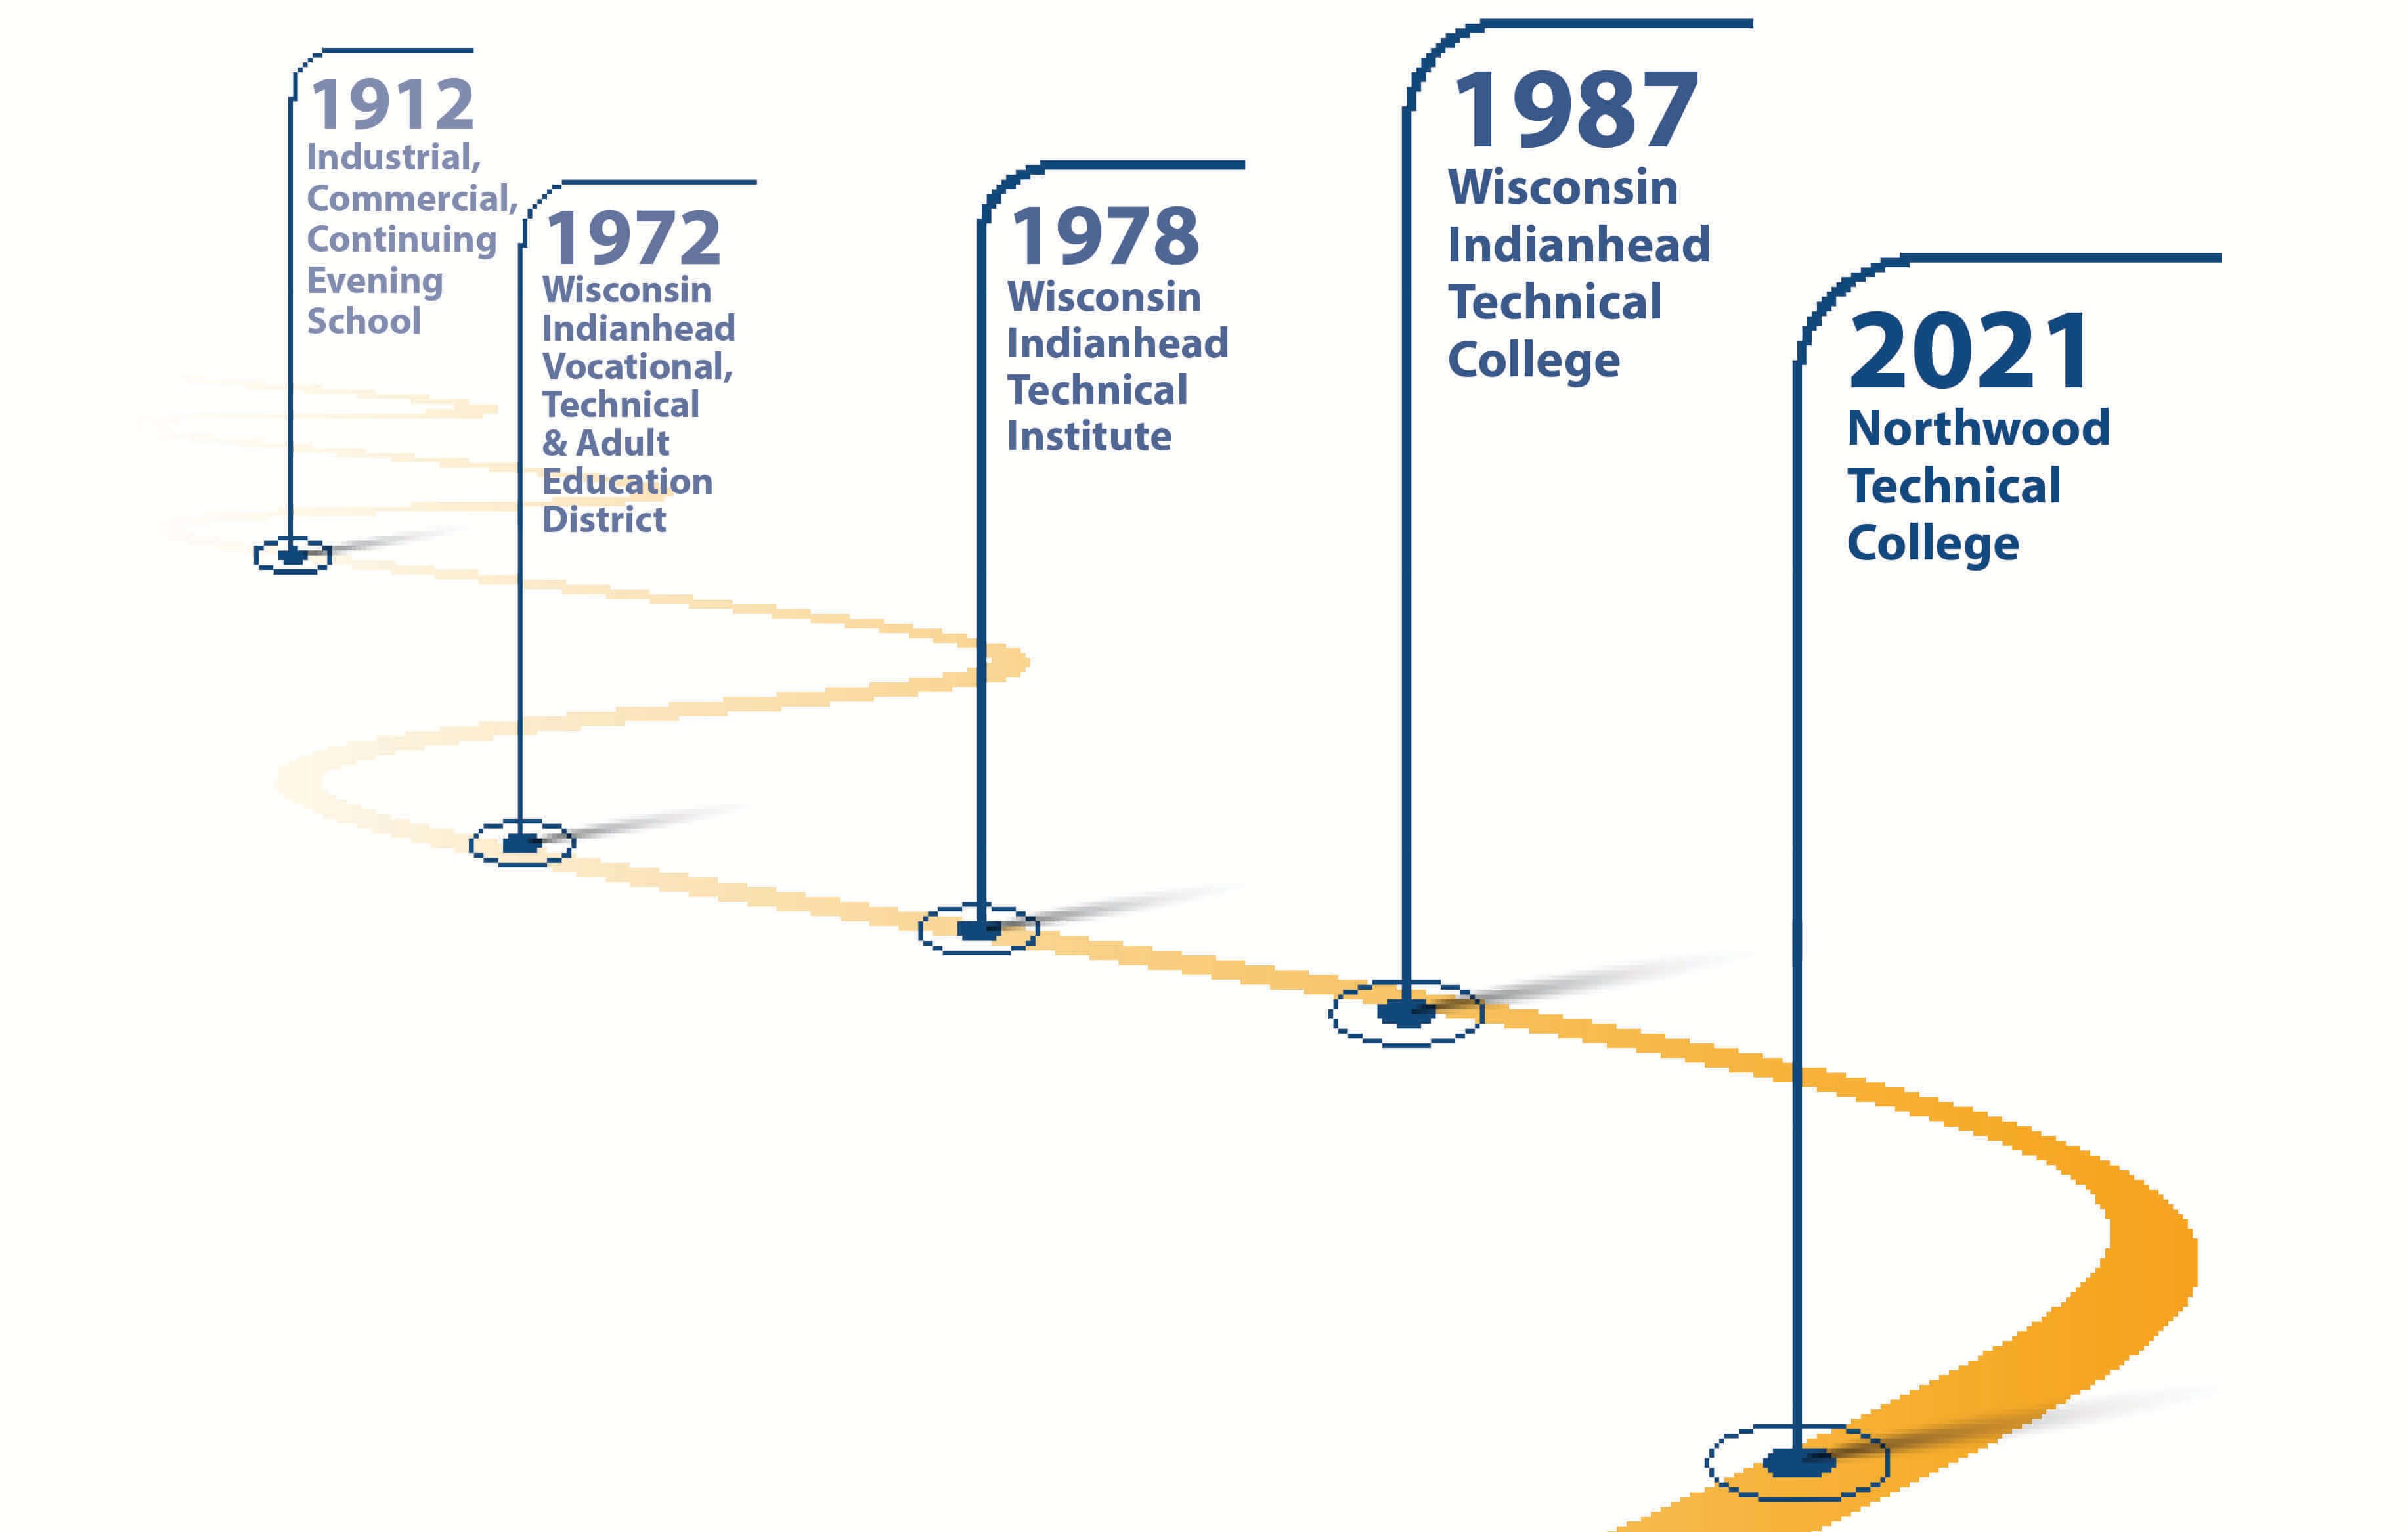 A timeline that shows the history of WITC names